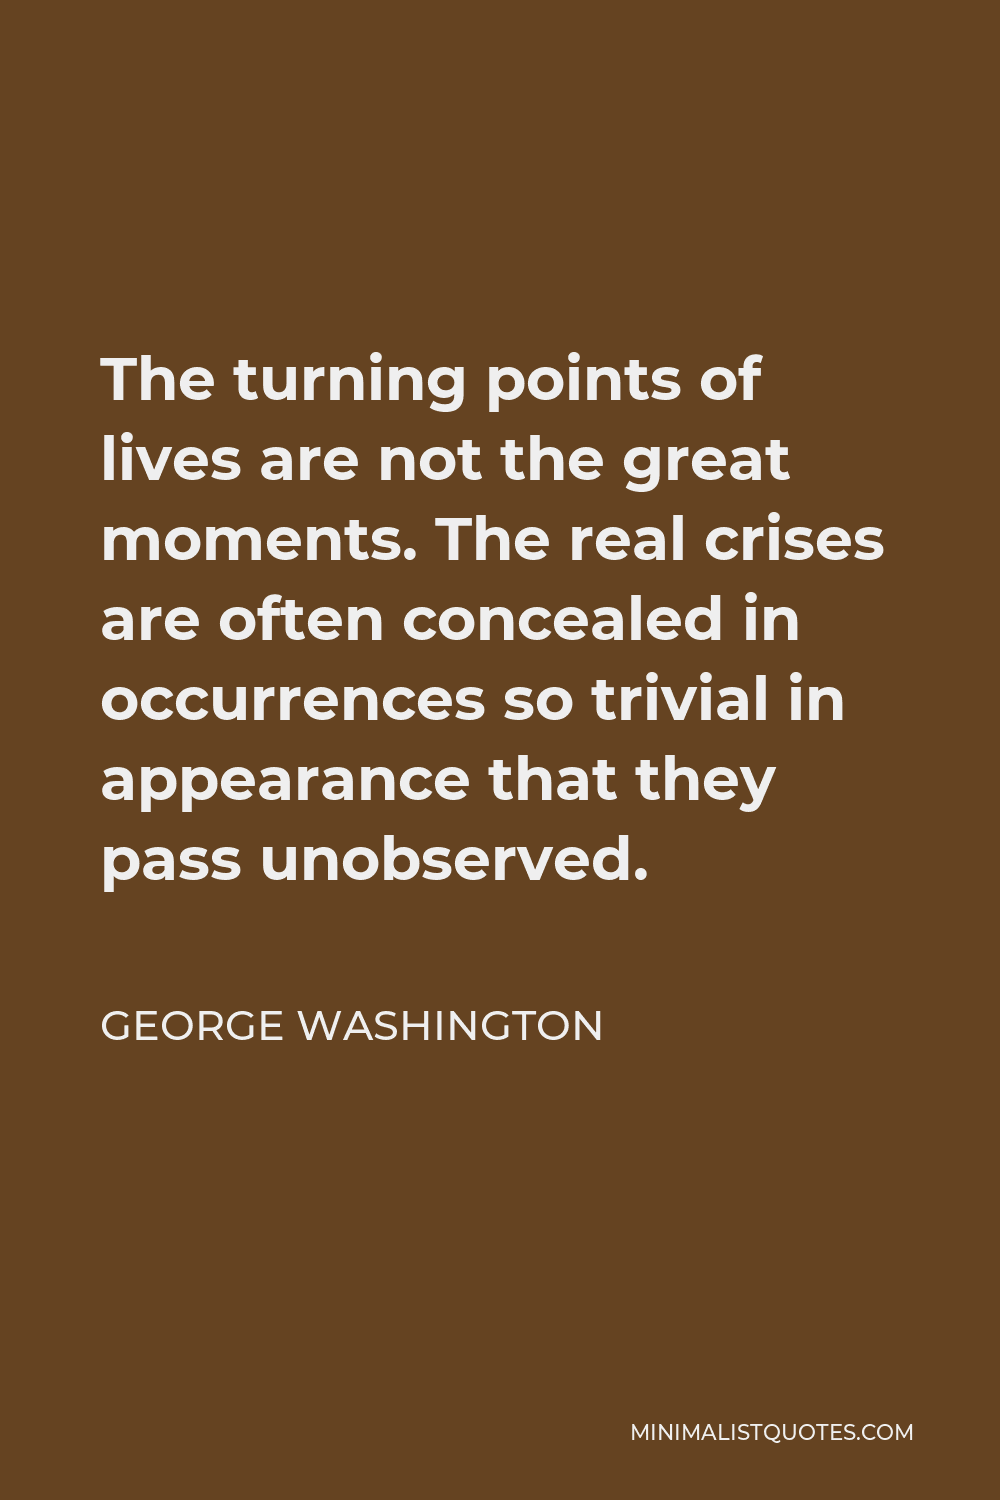 George Washington Quote - The turning points of lives are not the great moments. The real crises are often concealed in occurrences so trivial in appearance that they pass unobserved.